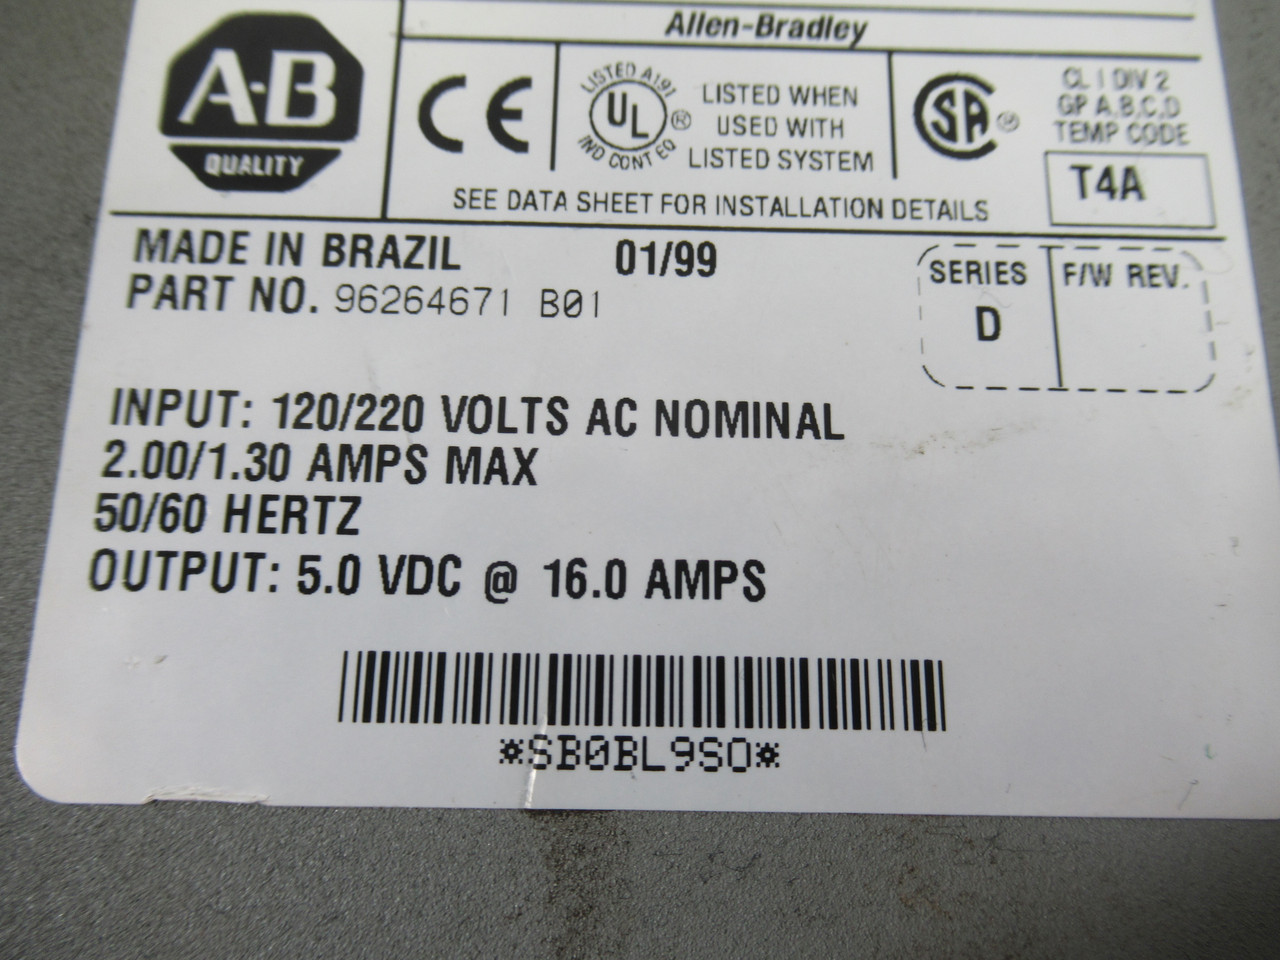 Allen-Bradley 1771-P7 AC Power Supply SER D REV A04 MISSING WIRE COVER USED